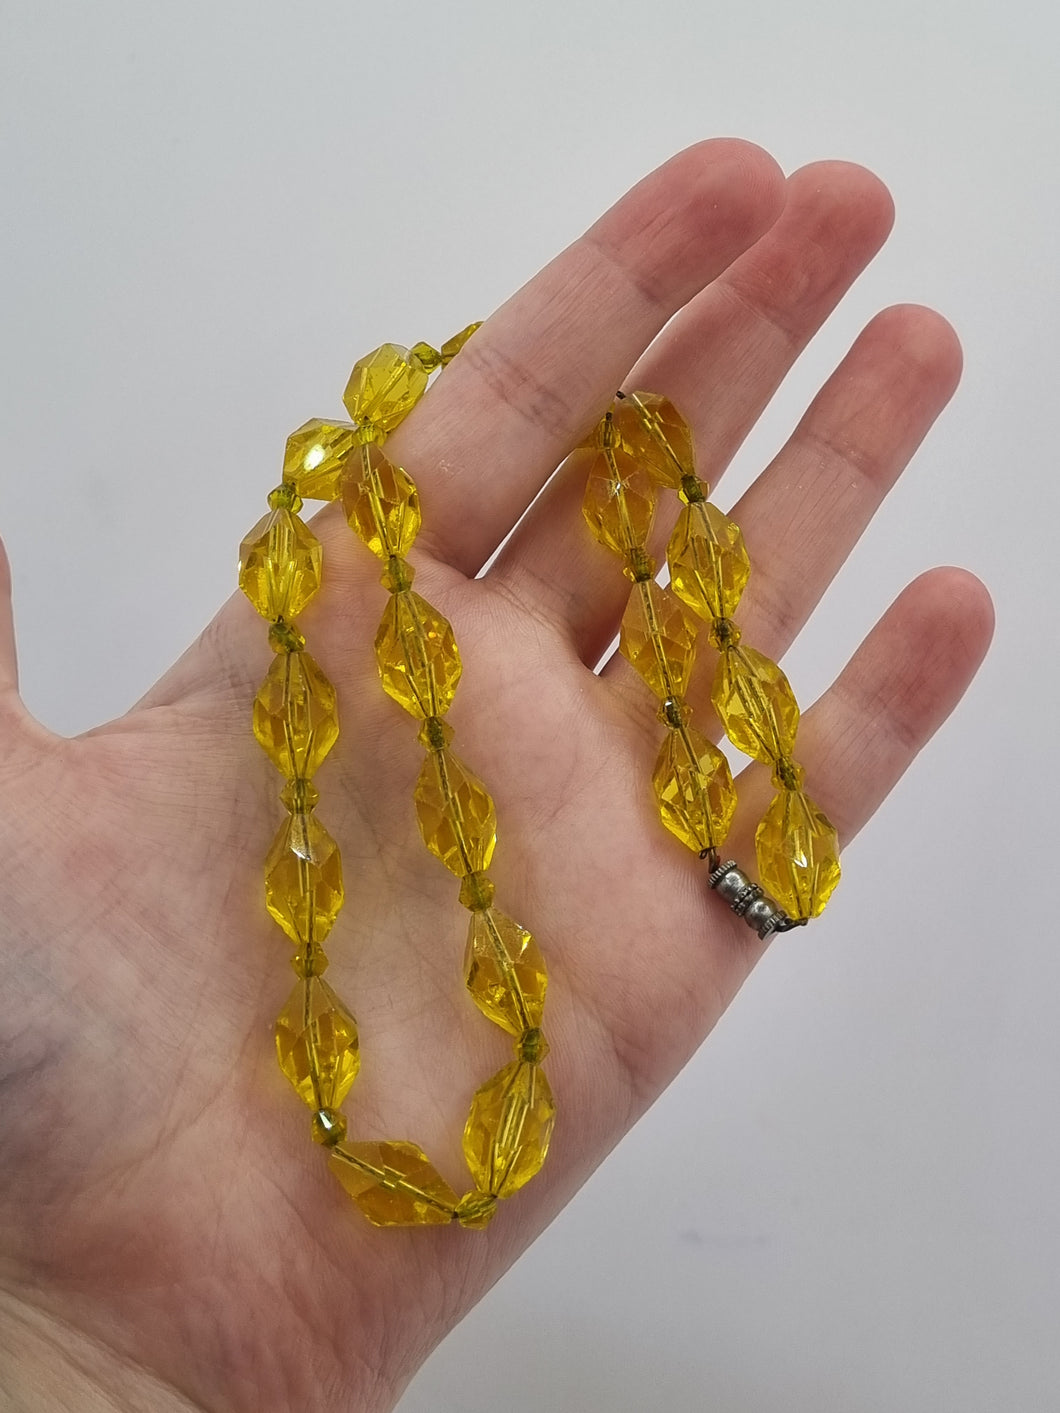 1930s Yellow Faceted Glass Necklace